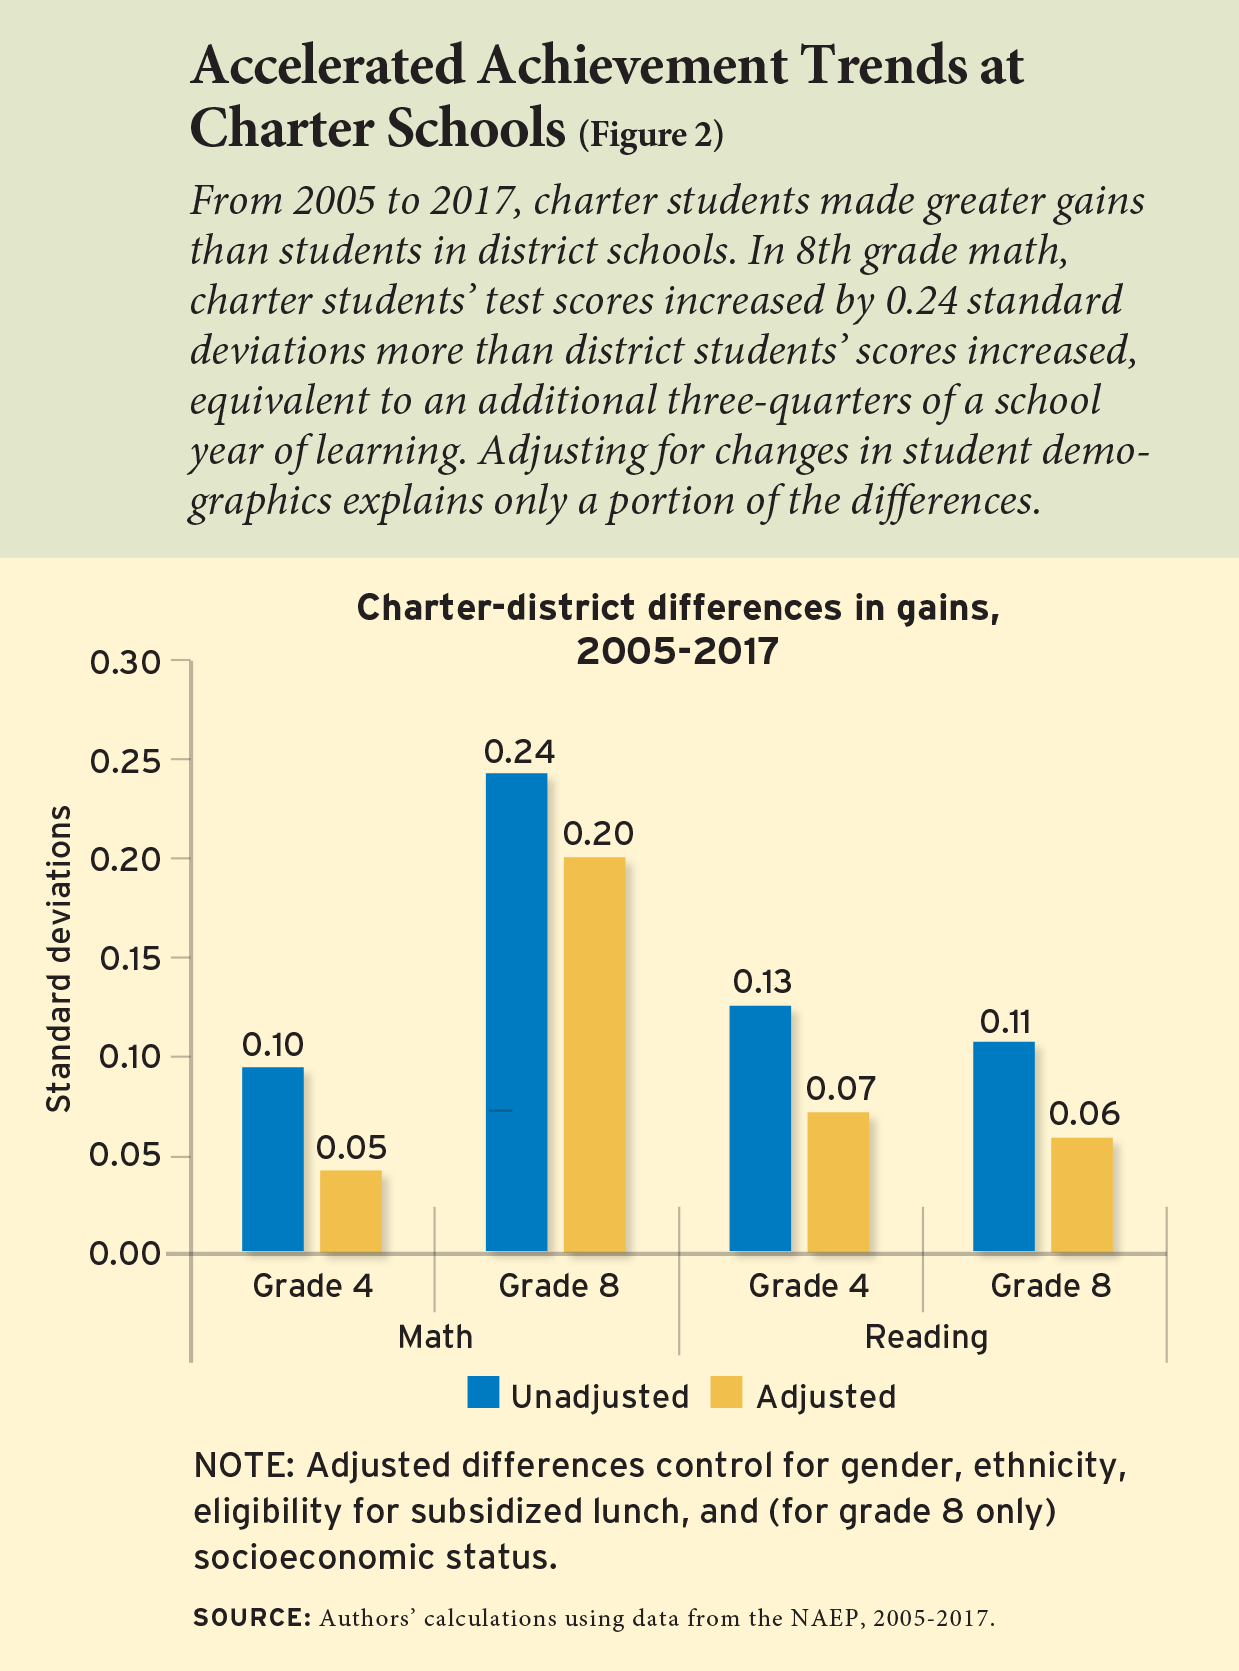 Figure 2 - Accelerated Achievement Trends at Charter Schools